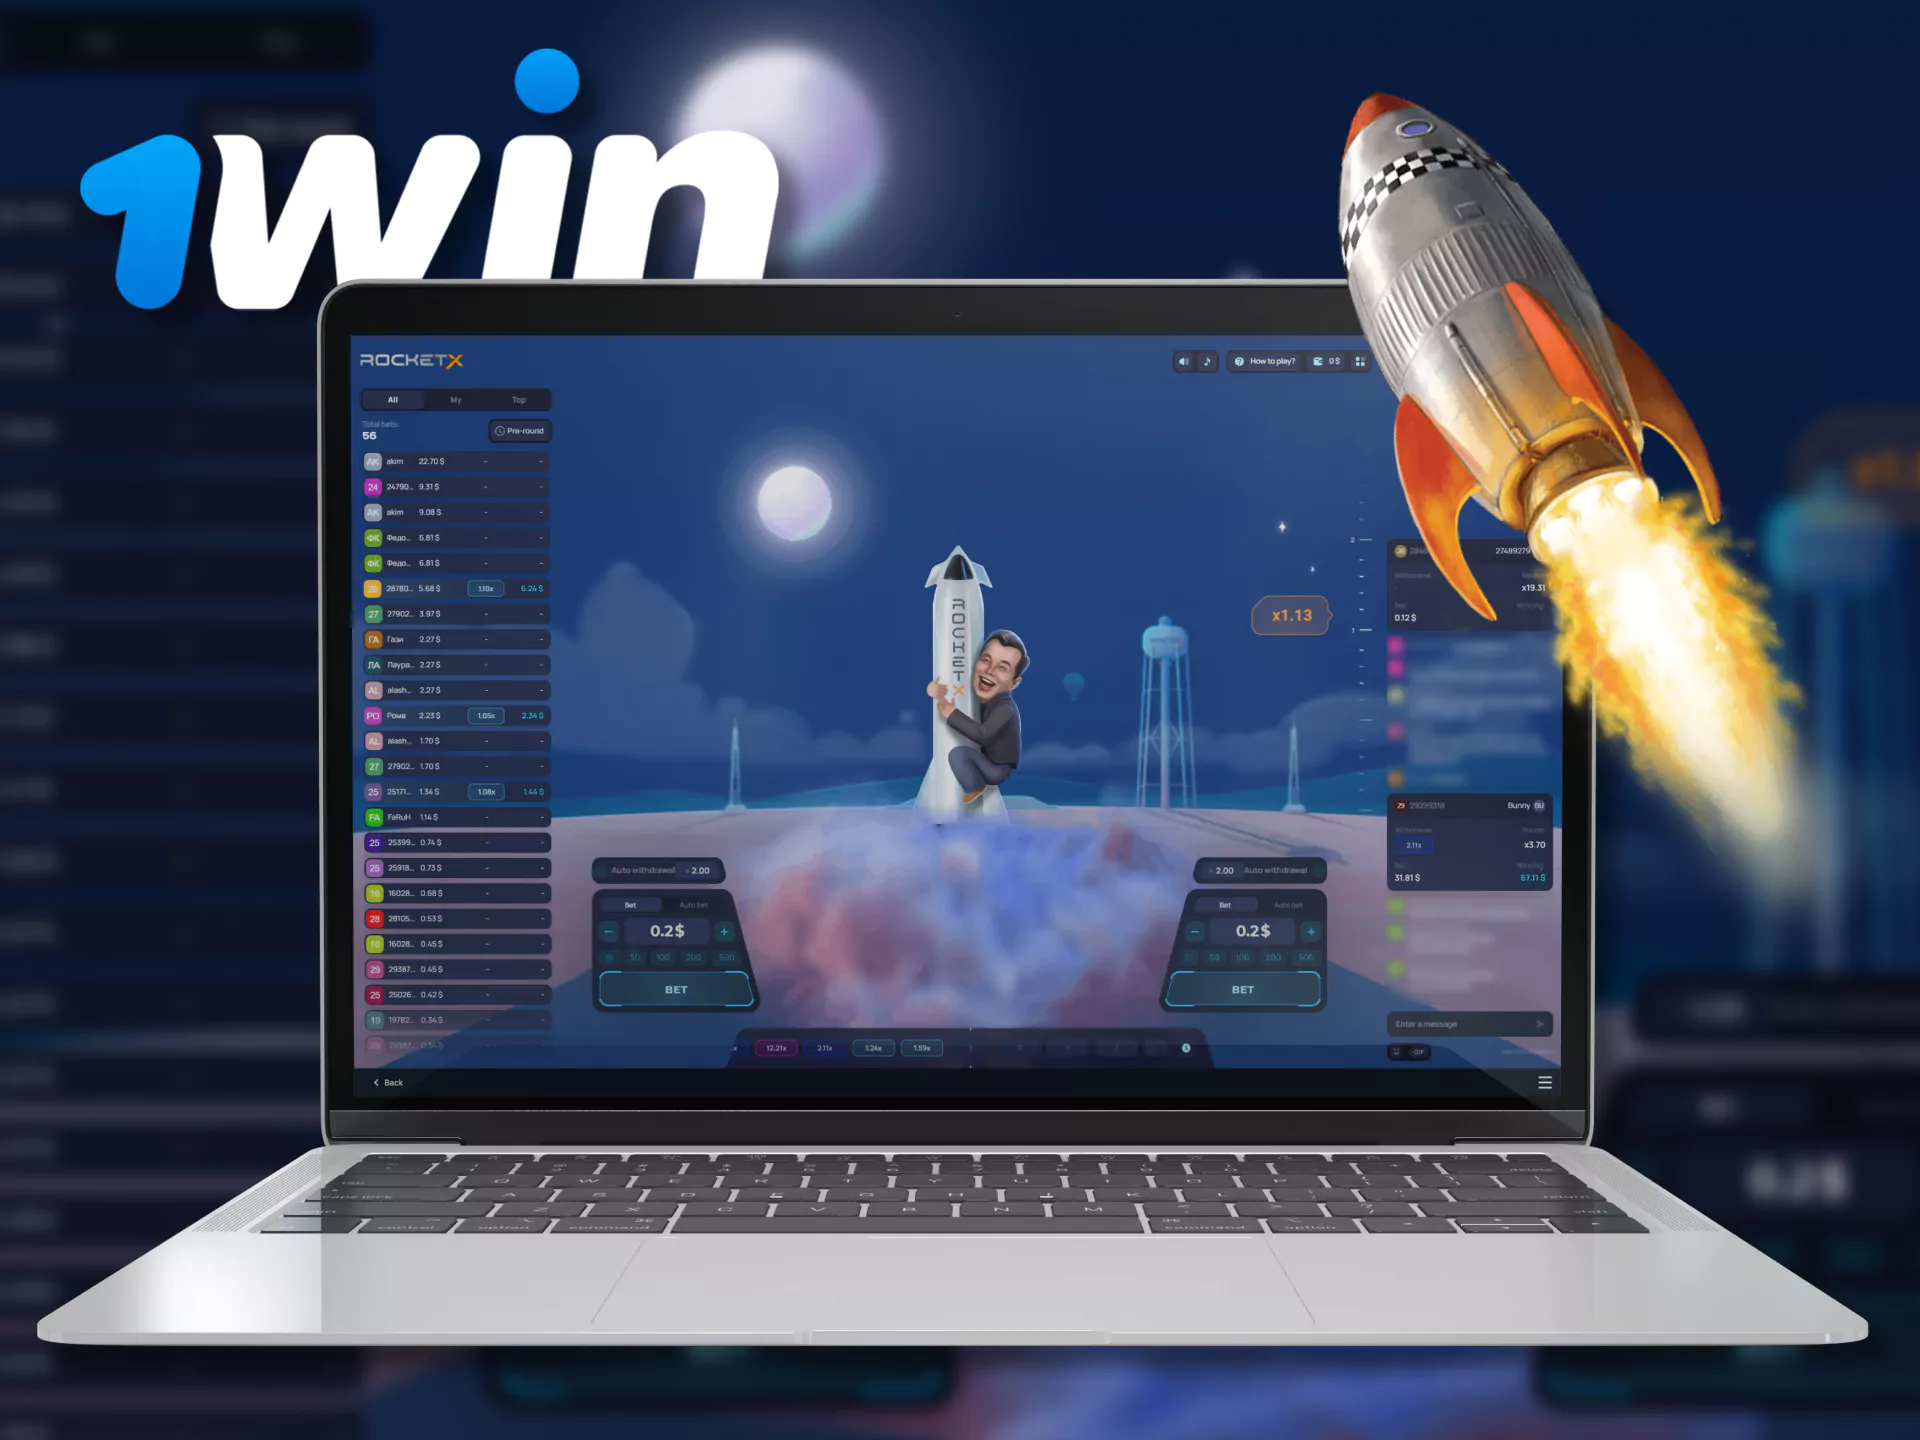 At 1win, start playing Rocket X, find out how easy it is with these instructions.